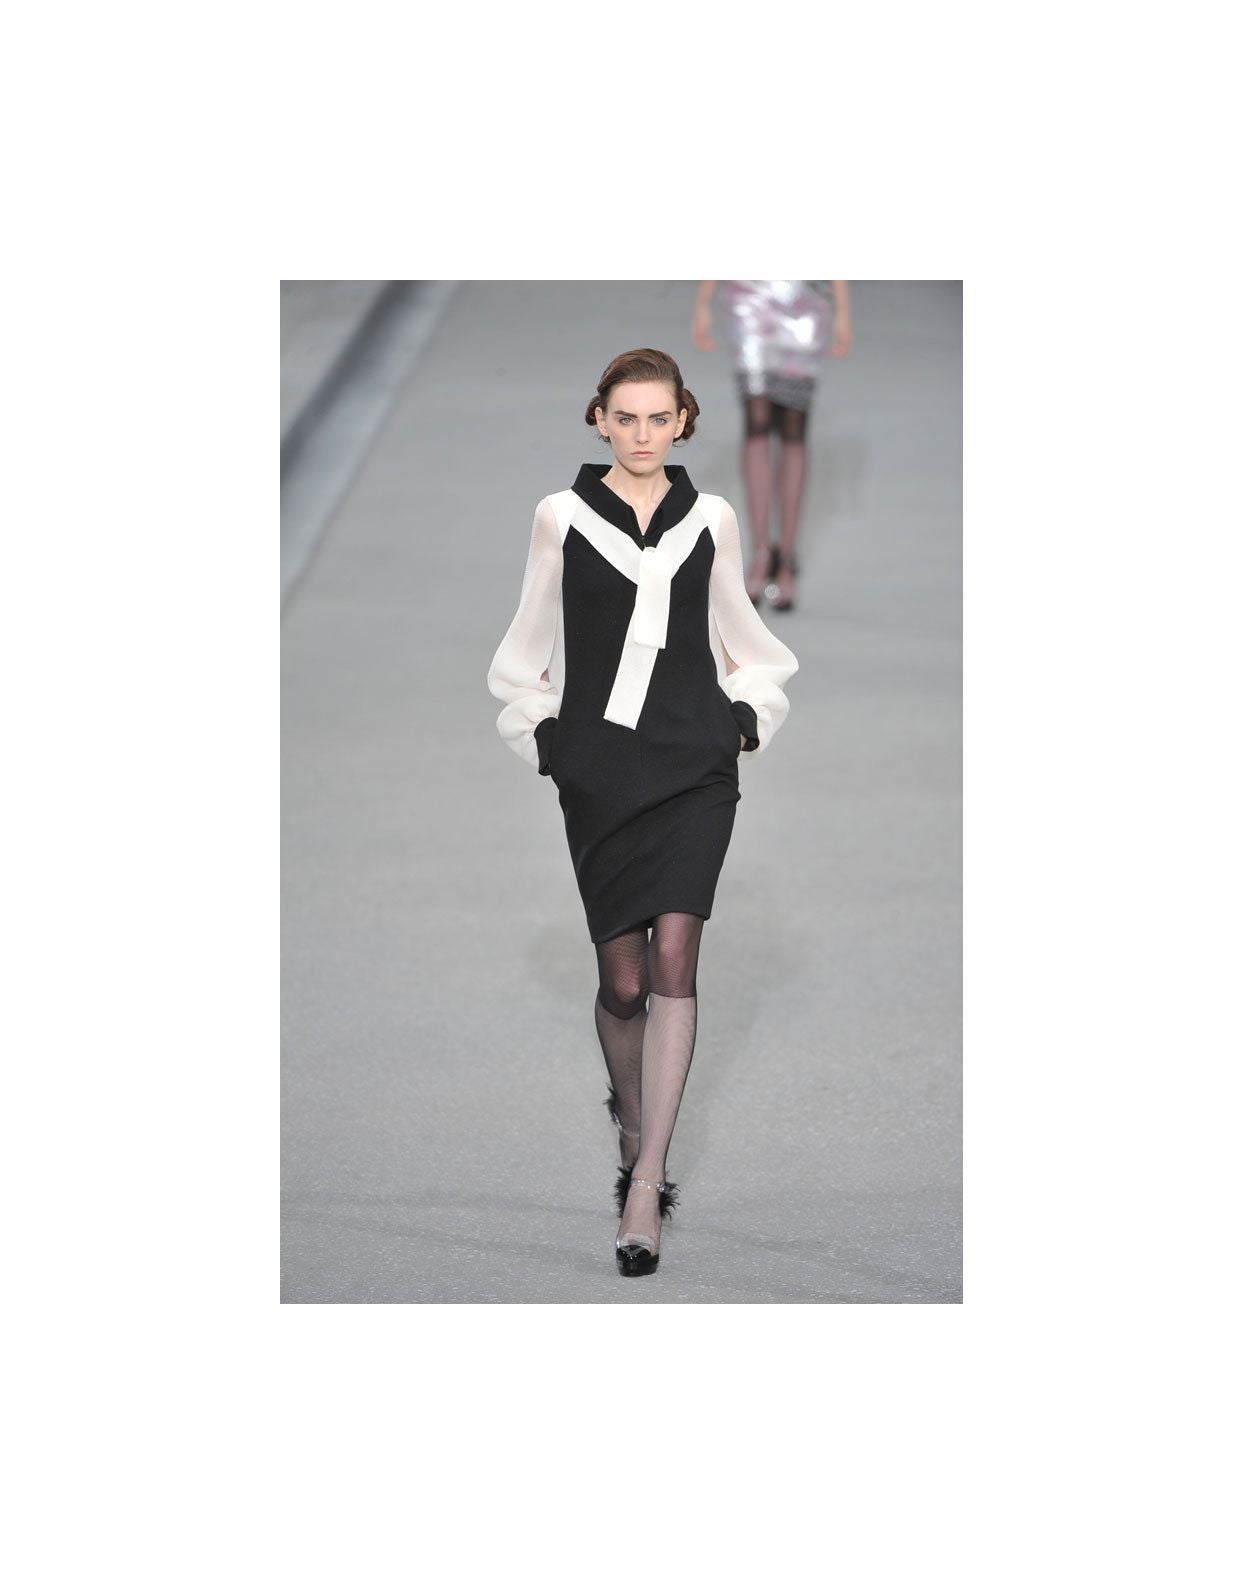 Chanel dress from spring 2009 RTW collection features a zipper front fastening and a hook-and-eye closure. Semi sheer ivory sleeves and bow tie detail, black cotton blend fabric has some shimmer to it. Sleeves have button closures at the cuffs.